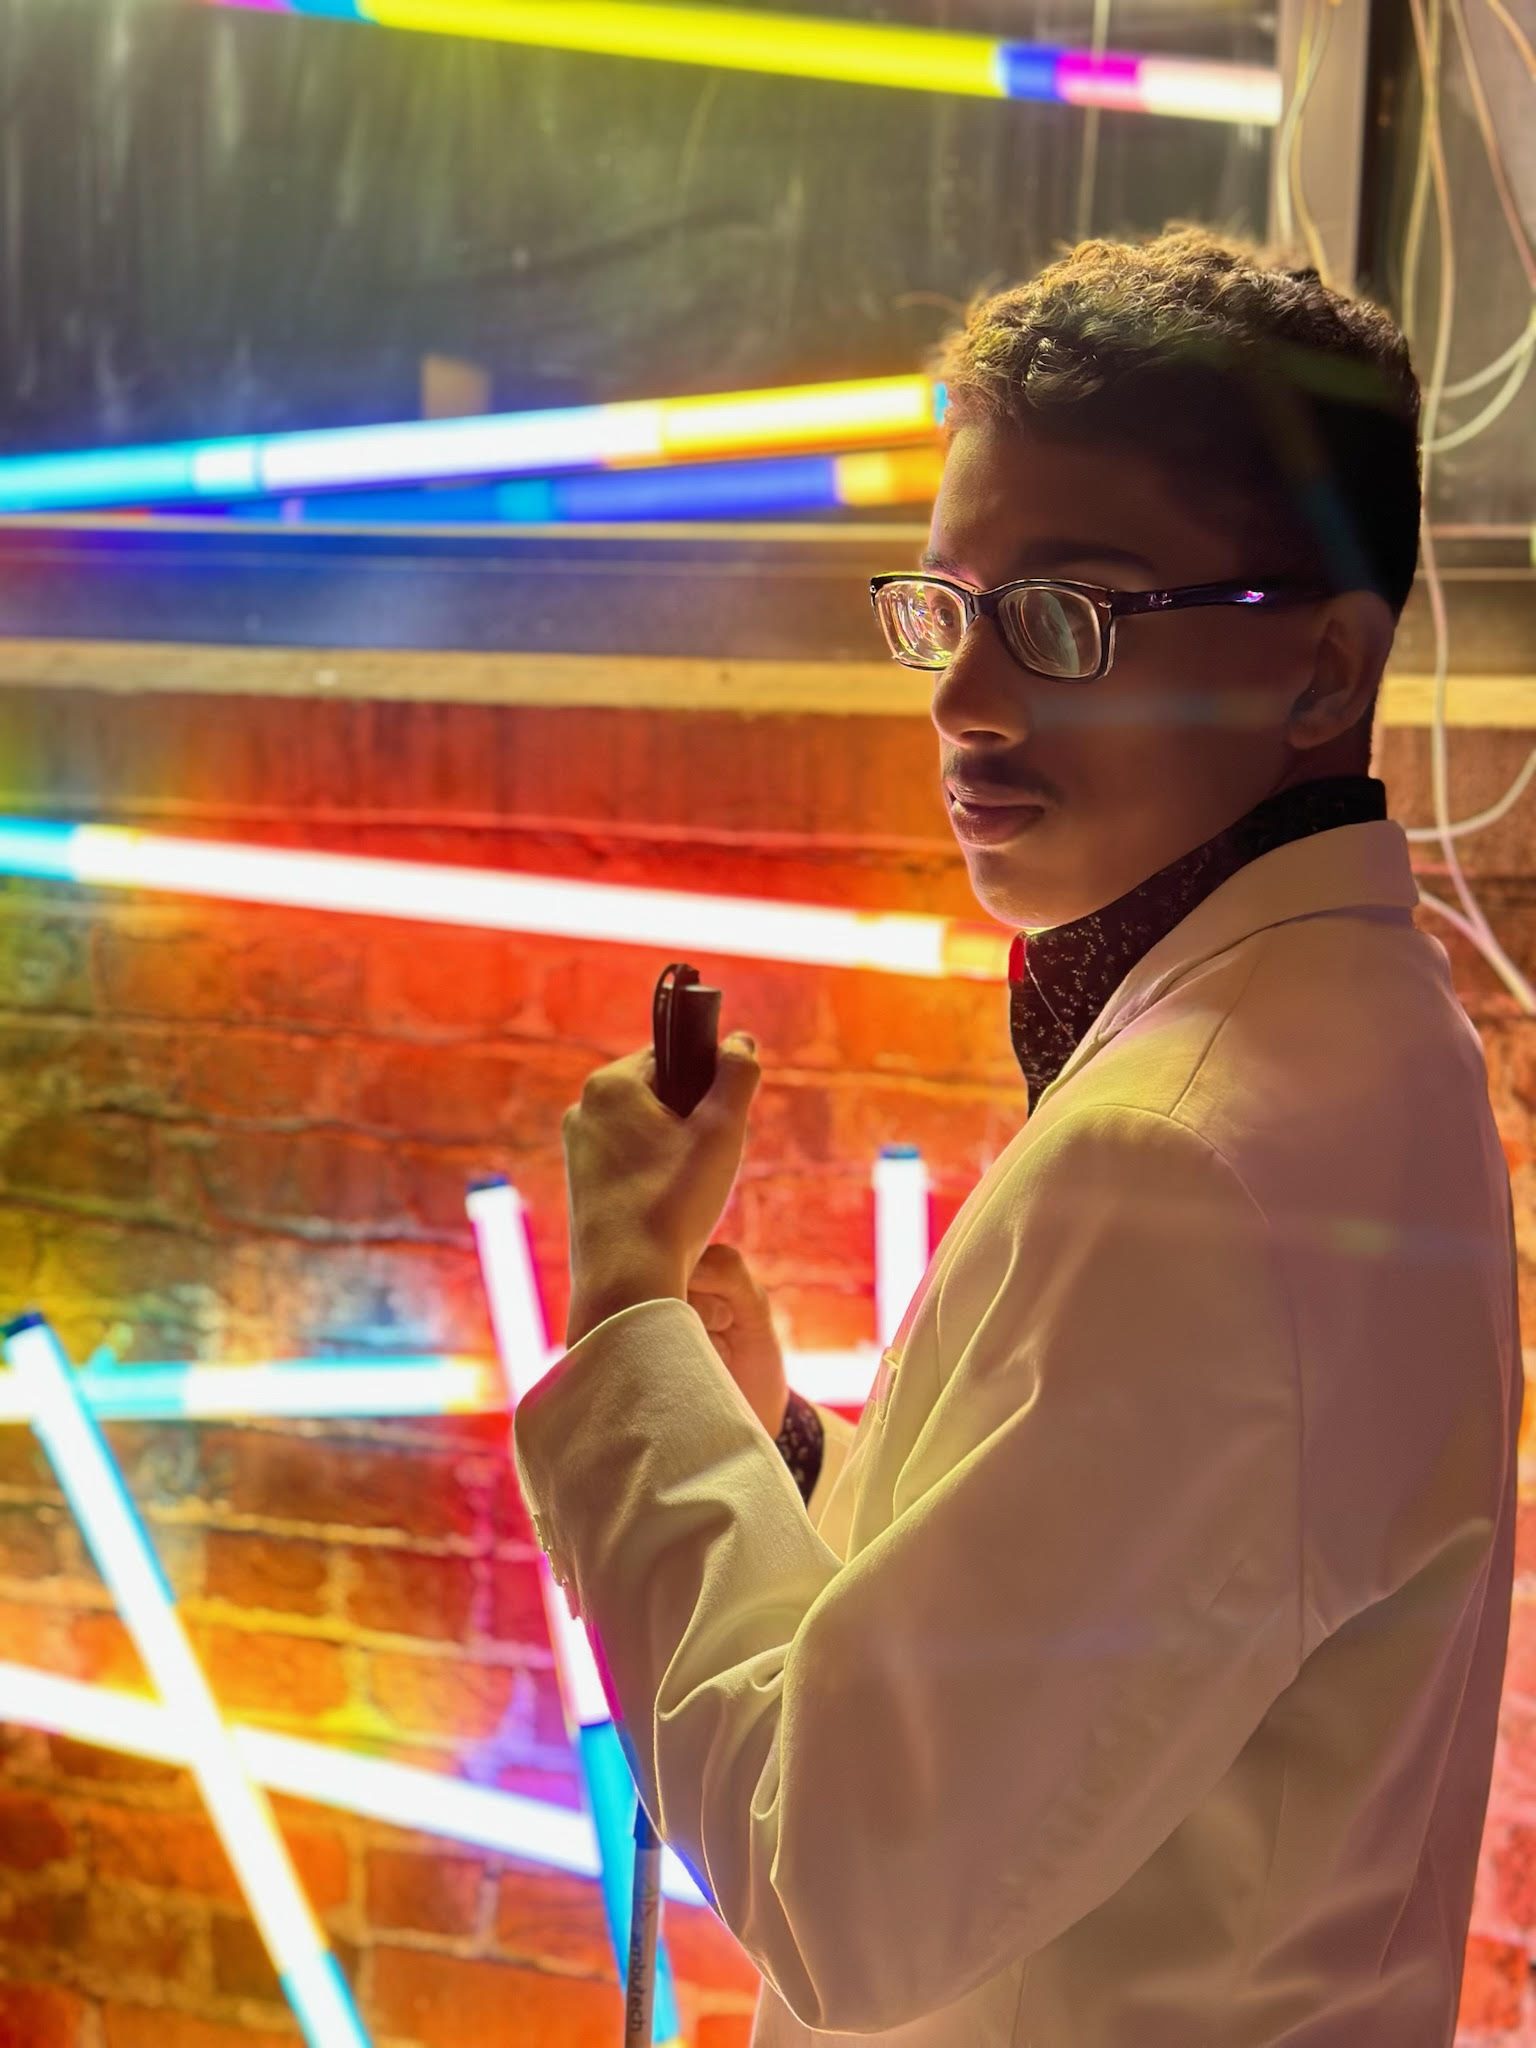 Caiden, a young man wearing glasses and a white suit, stands in front of an art installation of multi-colored neon lights while holding his mobility cane.